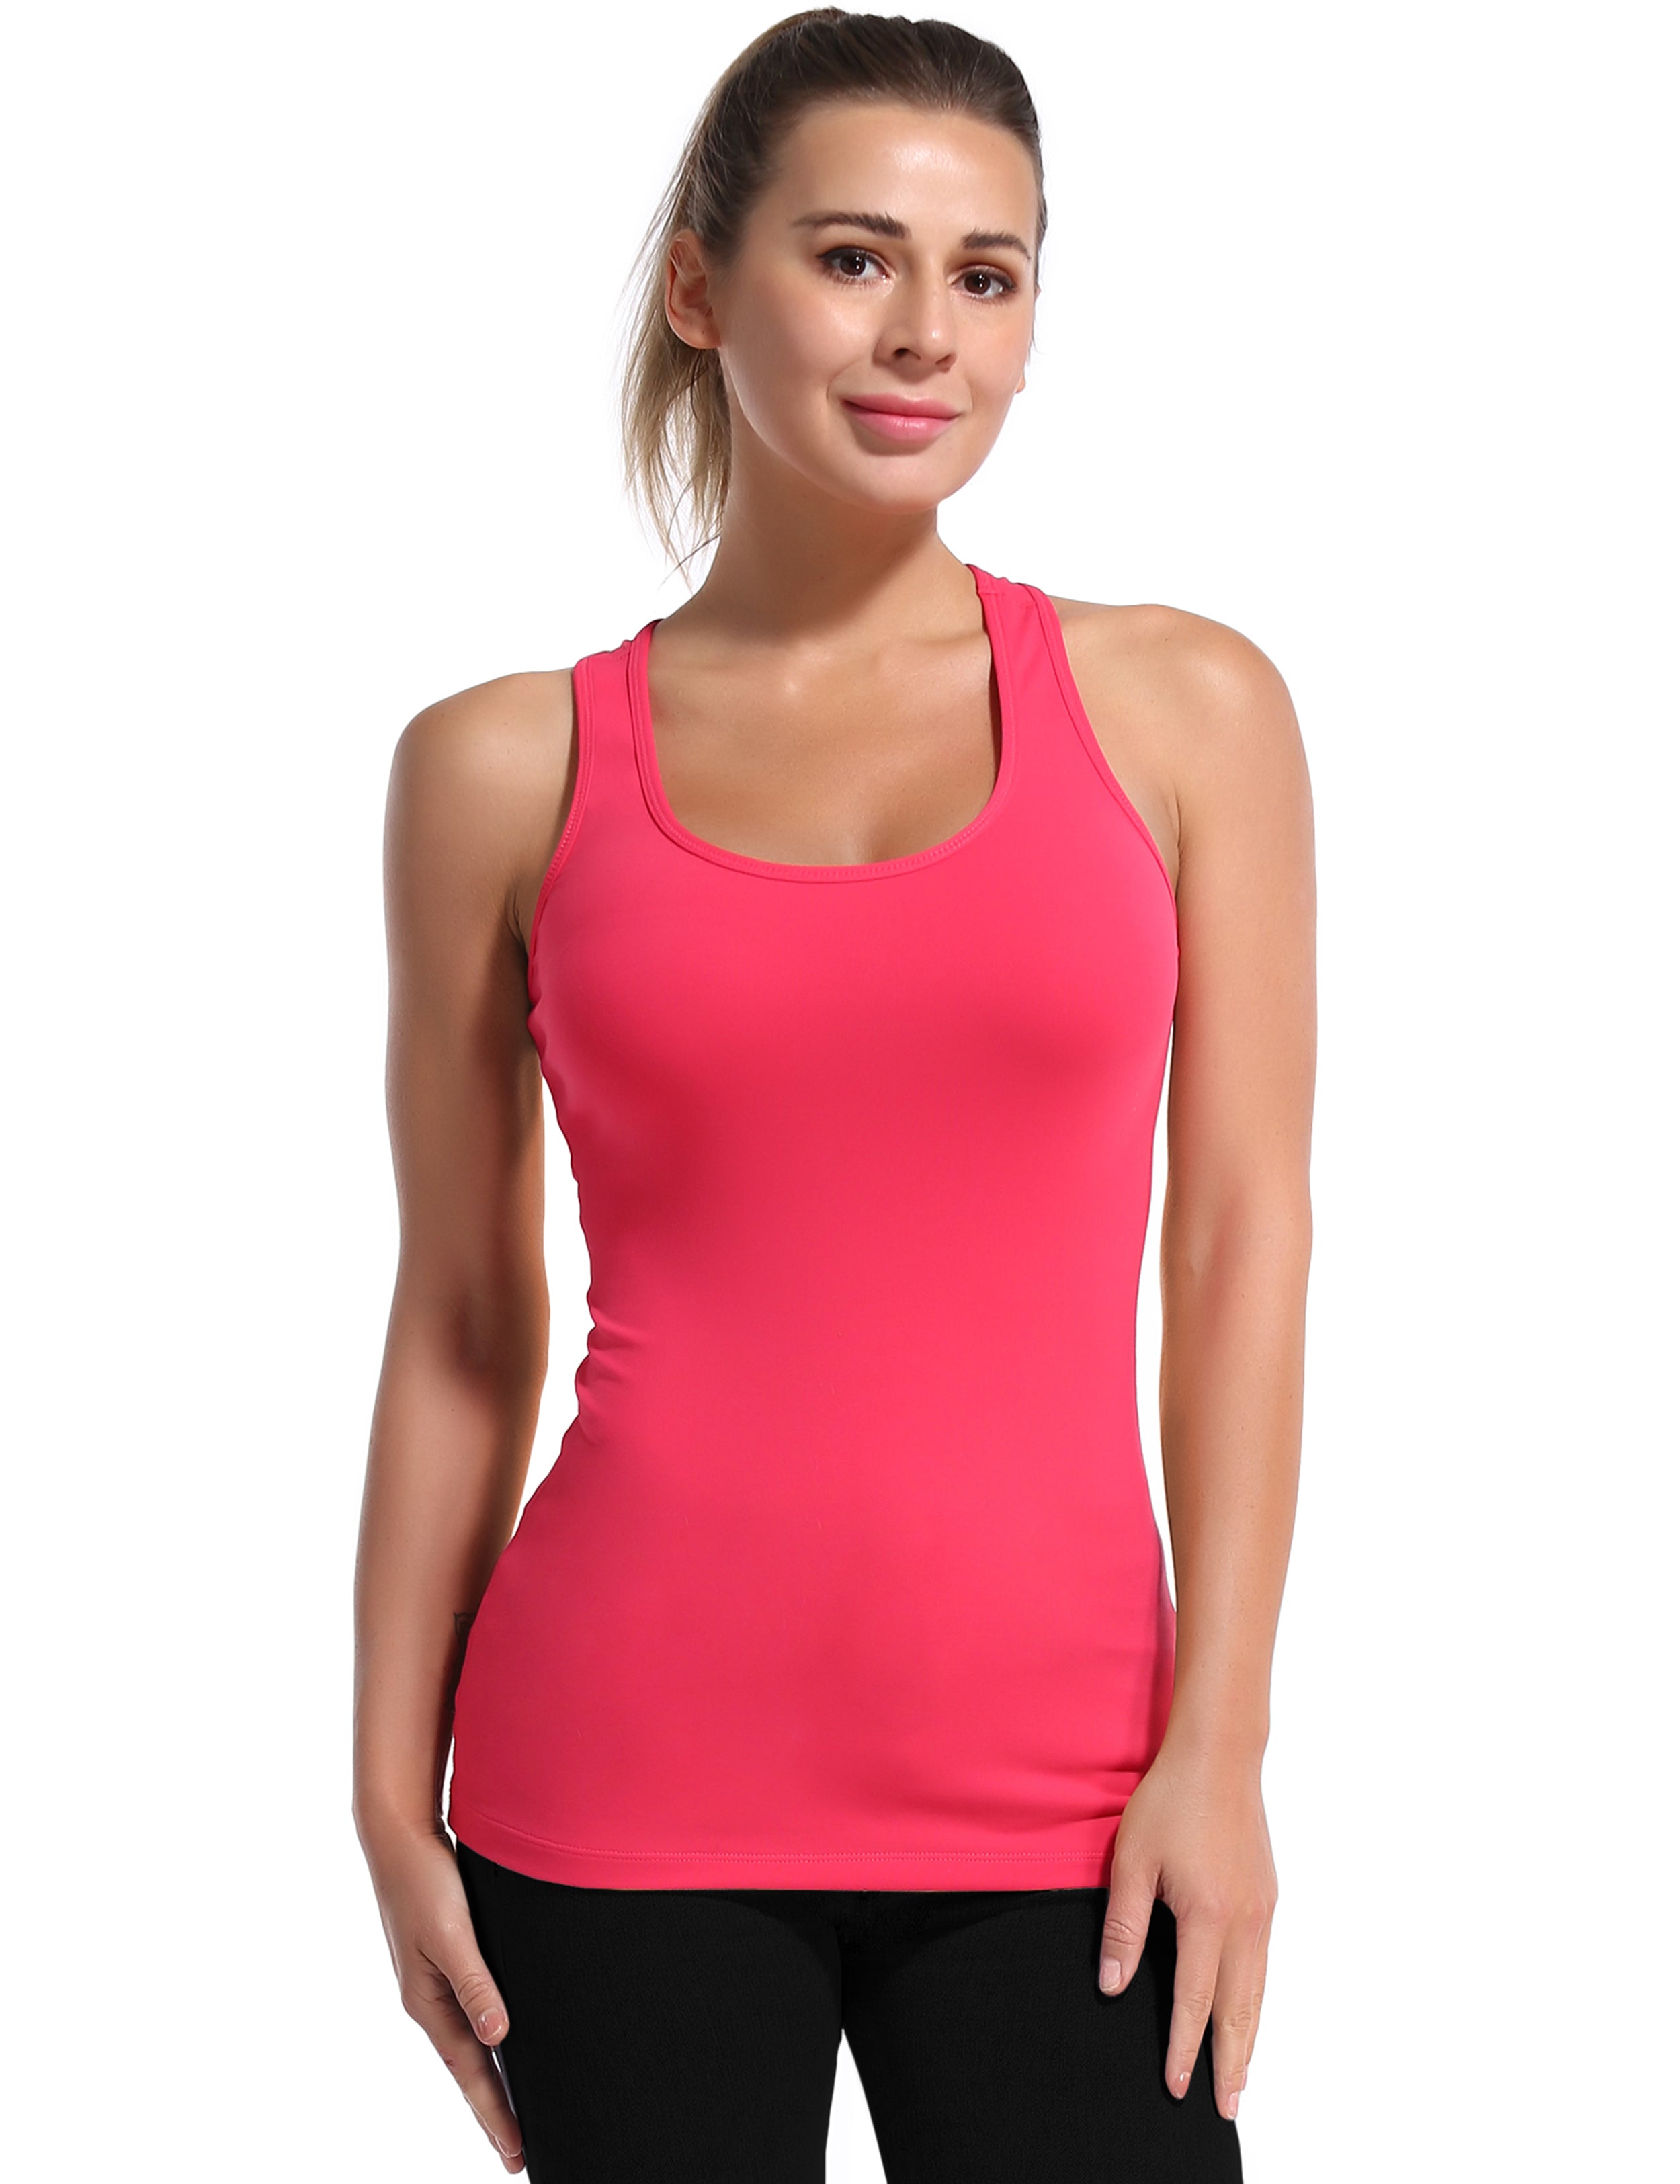 Racerback Athletic Tank Tops red 92%Nylon/8%Spandex(Cotton Soft) Designed for Tall Size Tight Fit So buttery soft, it feels weightless Sweat-wicking Four-way stretch Breathable Contours your body Sits below the waistband for moderate, everyday coverage